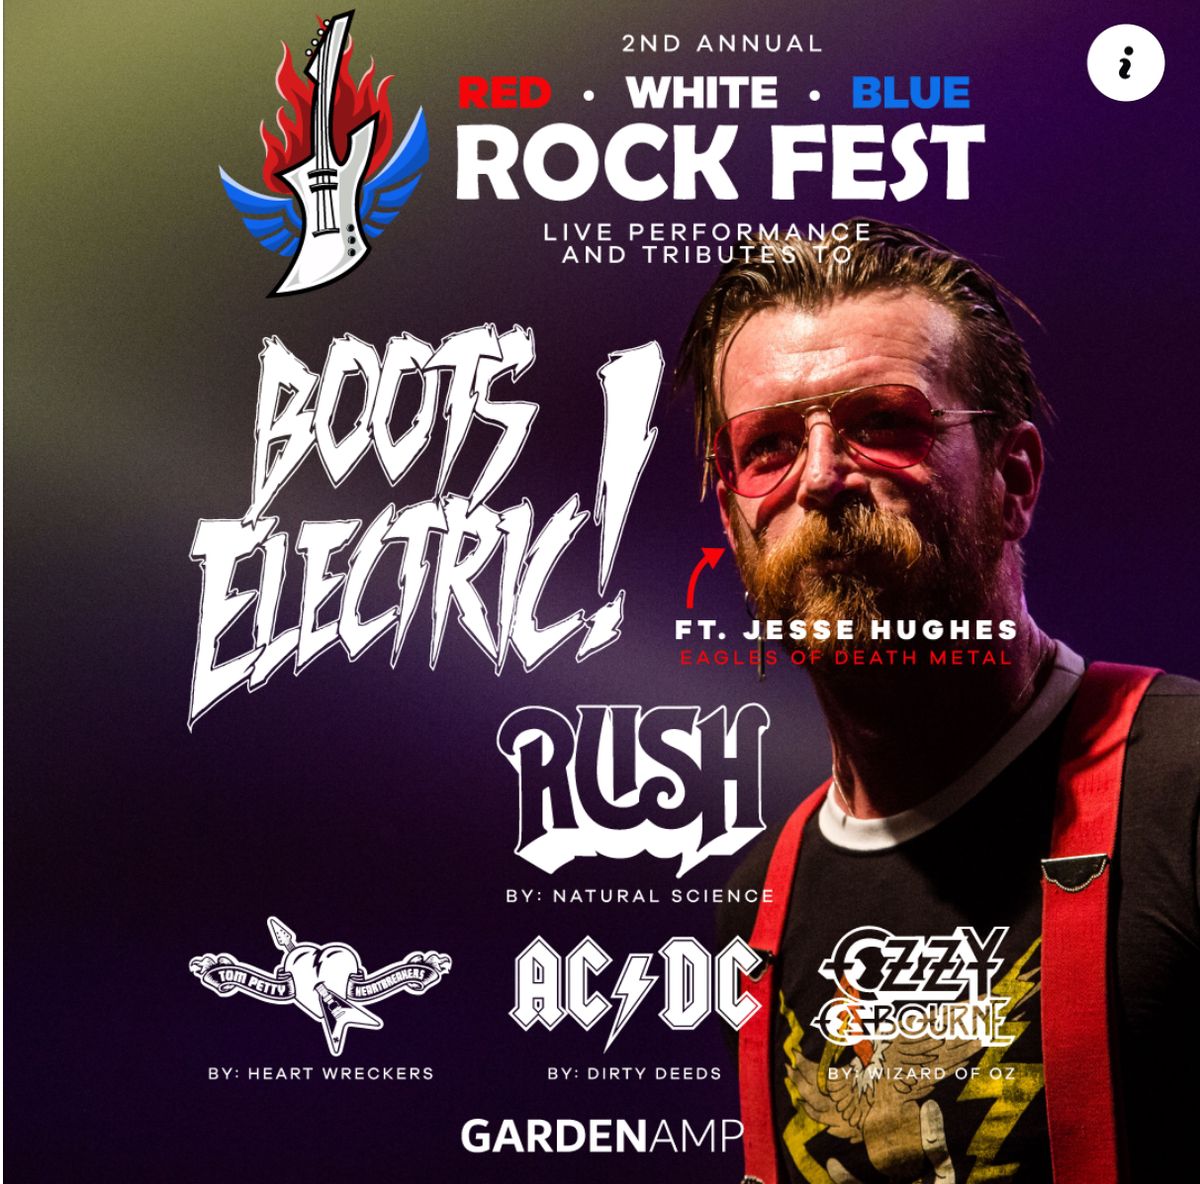 RUSH, AC\/DC, Ozzy, Petty tributes & Boots Electric! feat. Jesse Hughes - Eagles of Death Metal